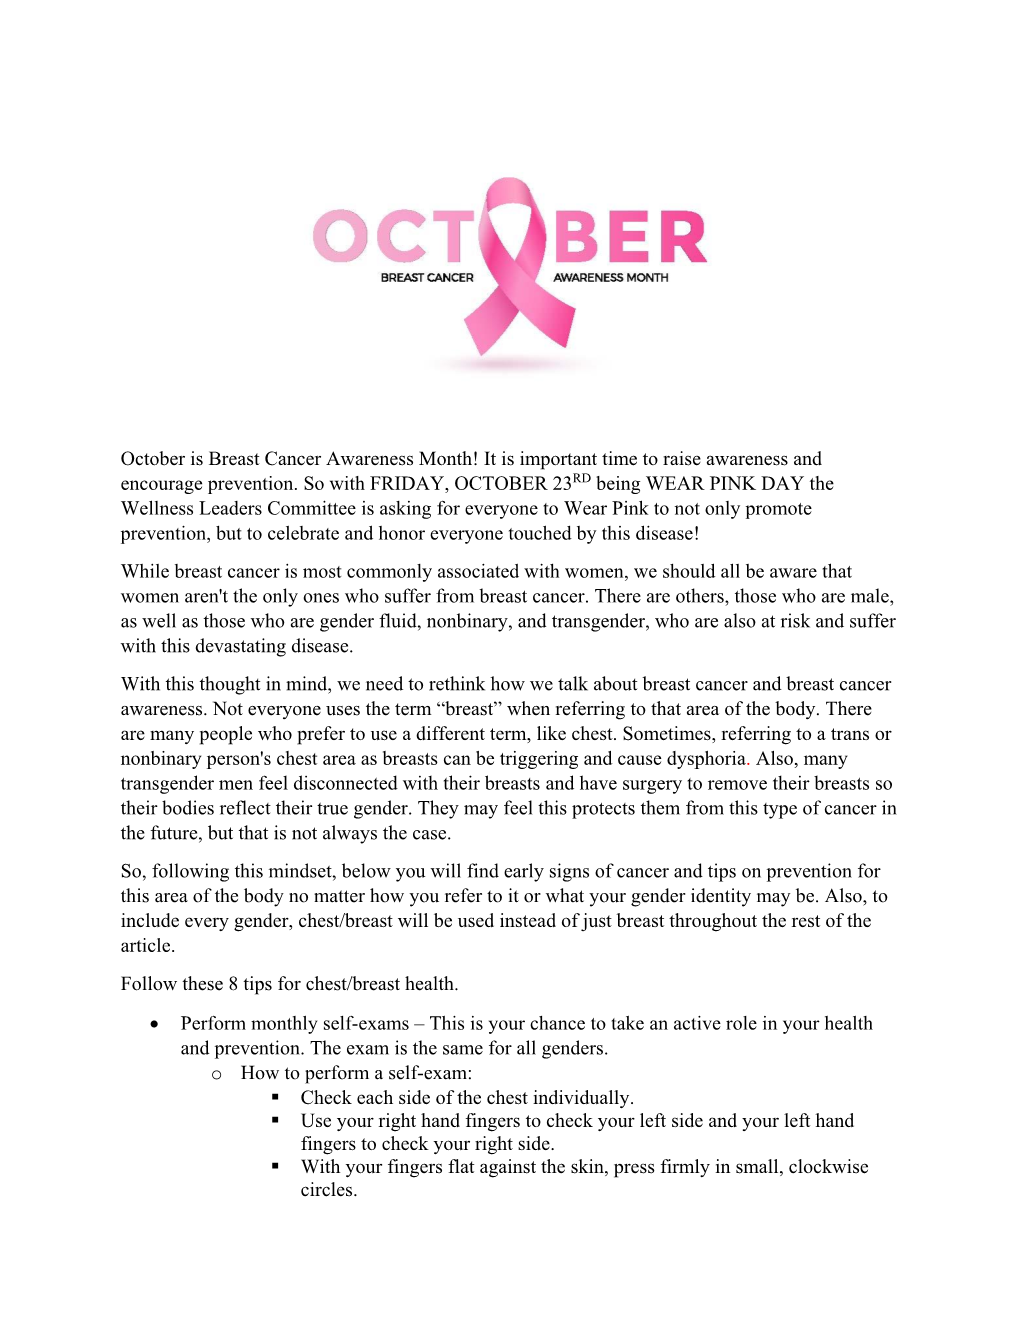 October Is Breast Cancer Awareness Month! It Is Important Time to Raise Awareness and Encourage Prevention